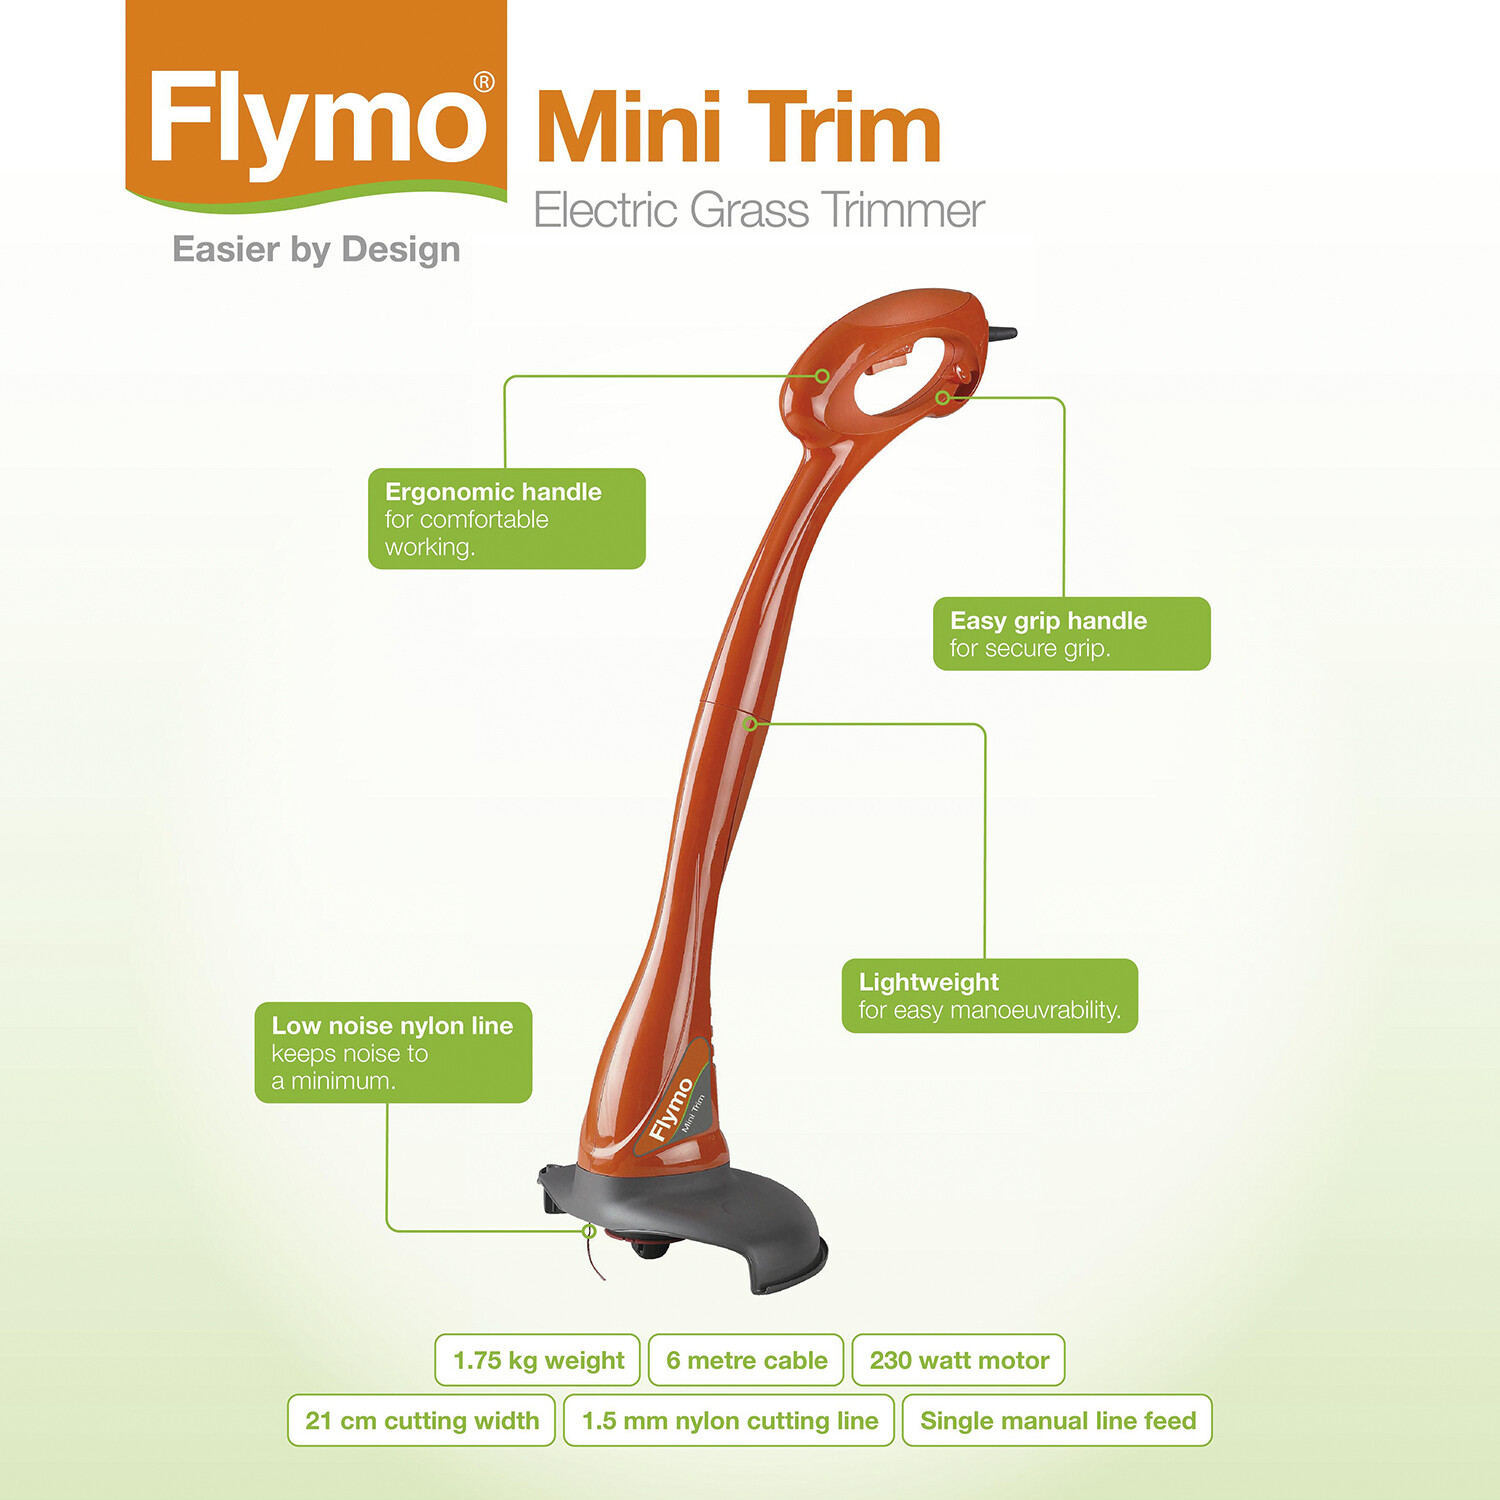 Flymo Red Mini Trim Electric Grass Trimmer Image 3